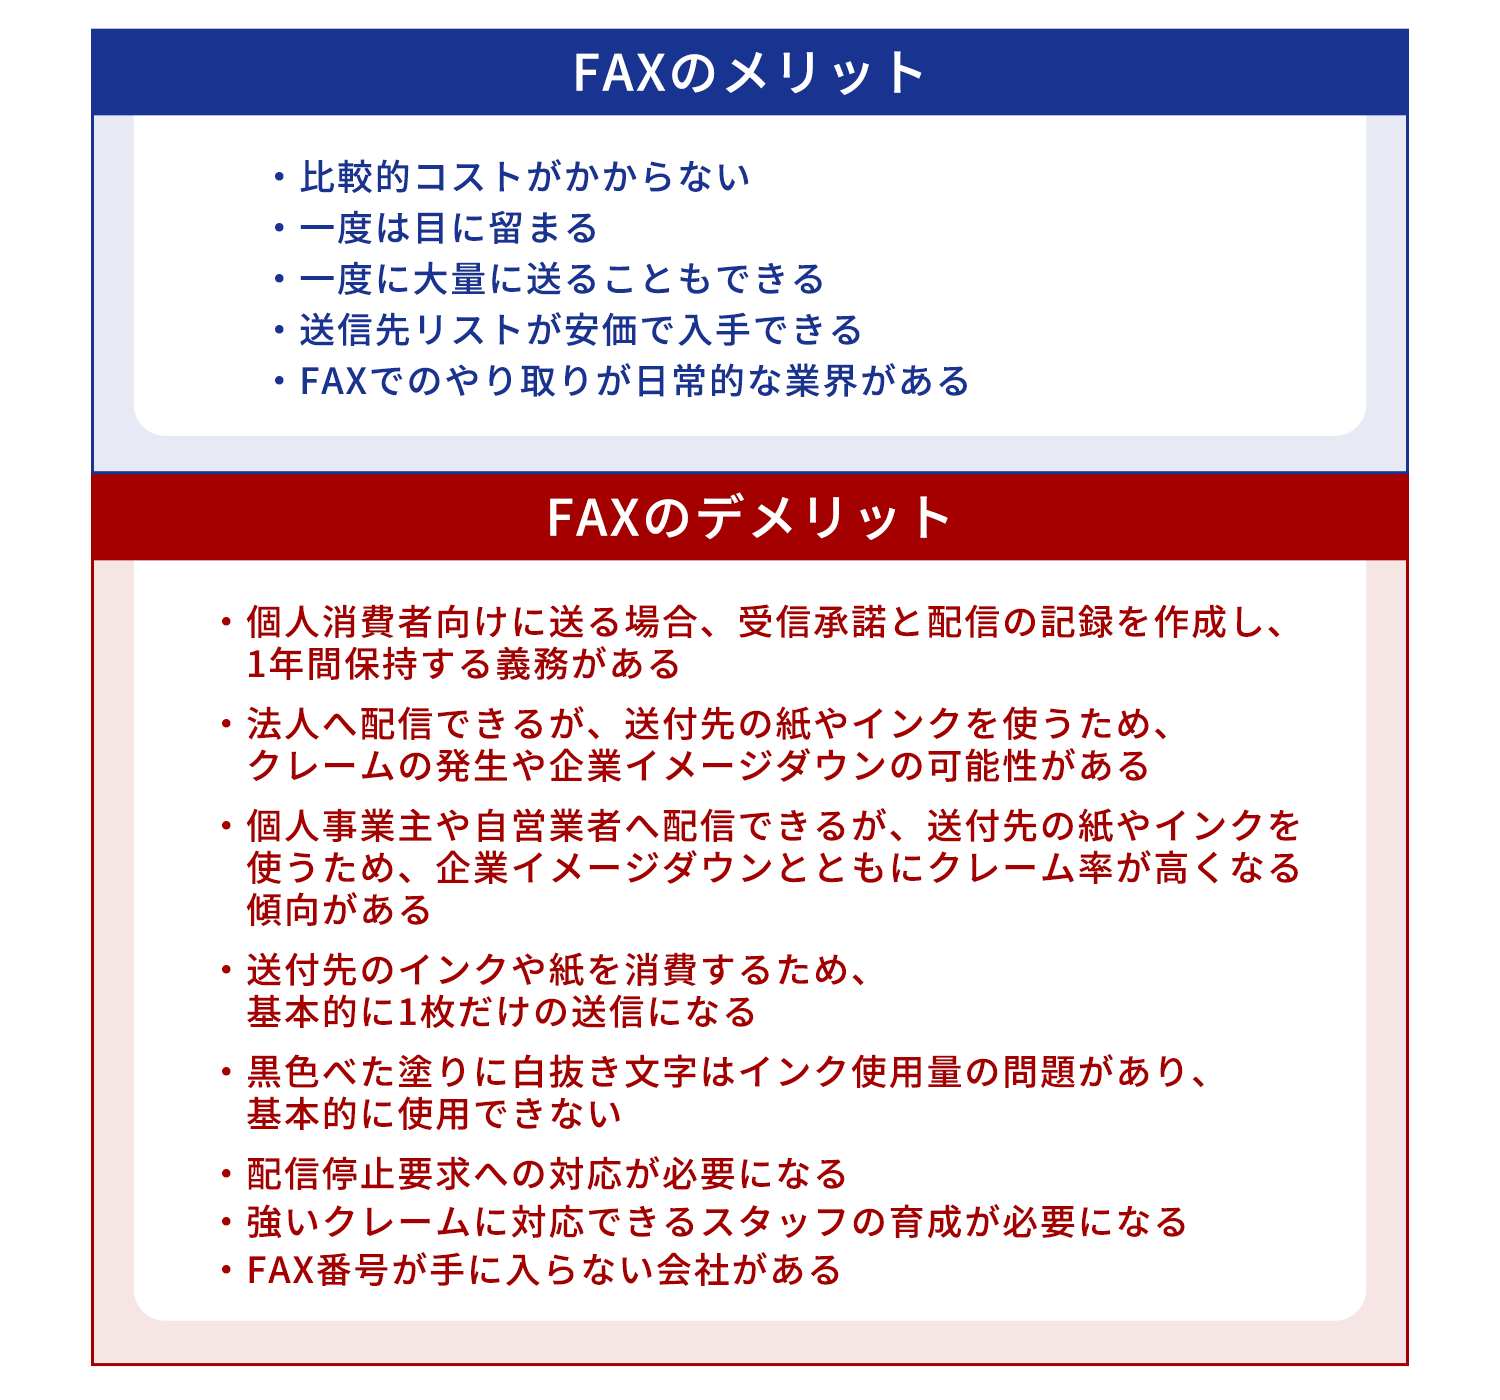 FAXのメリット・デメリット